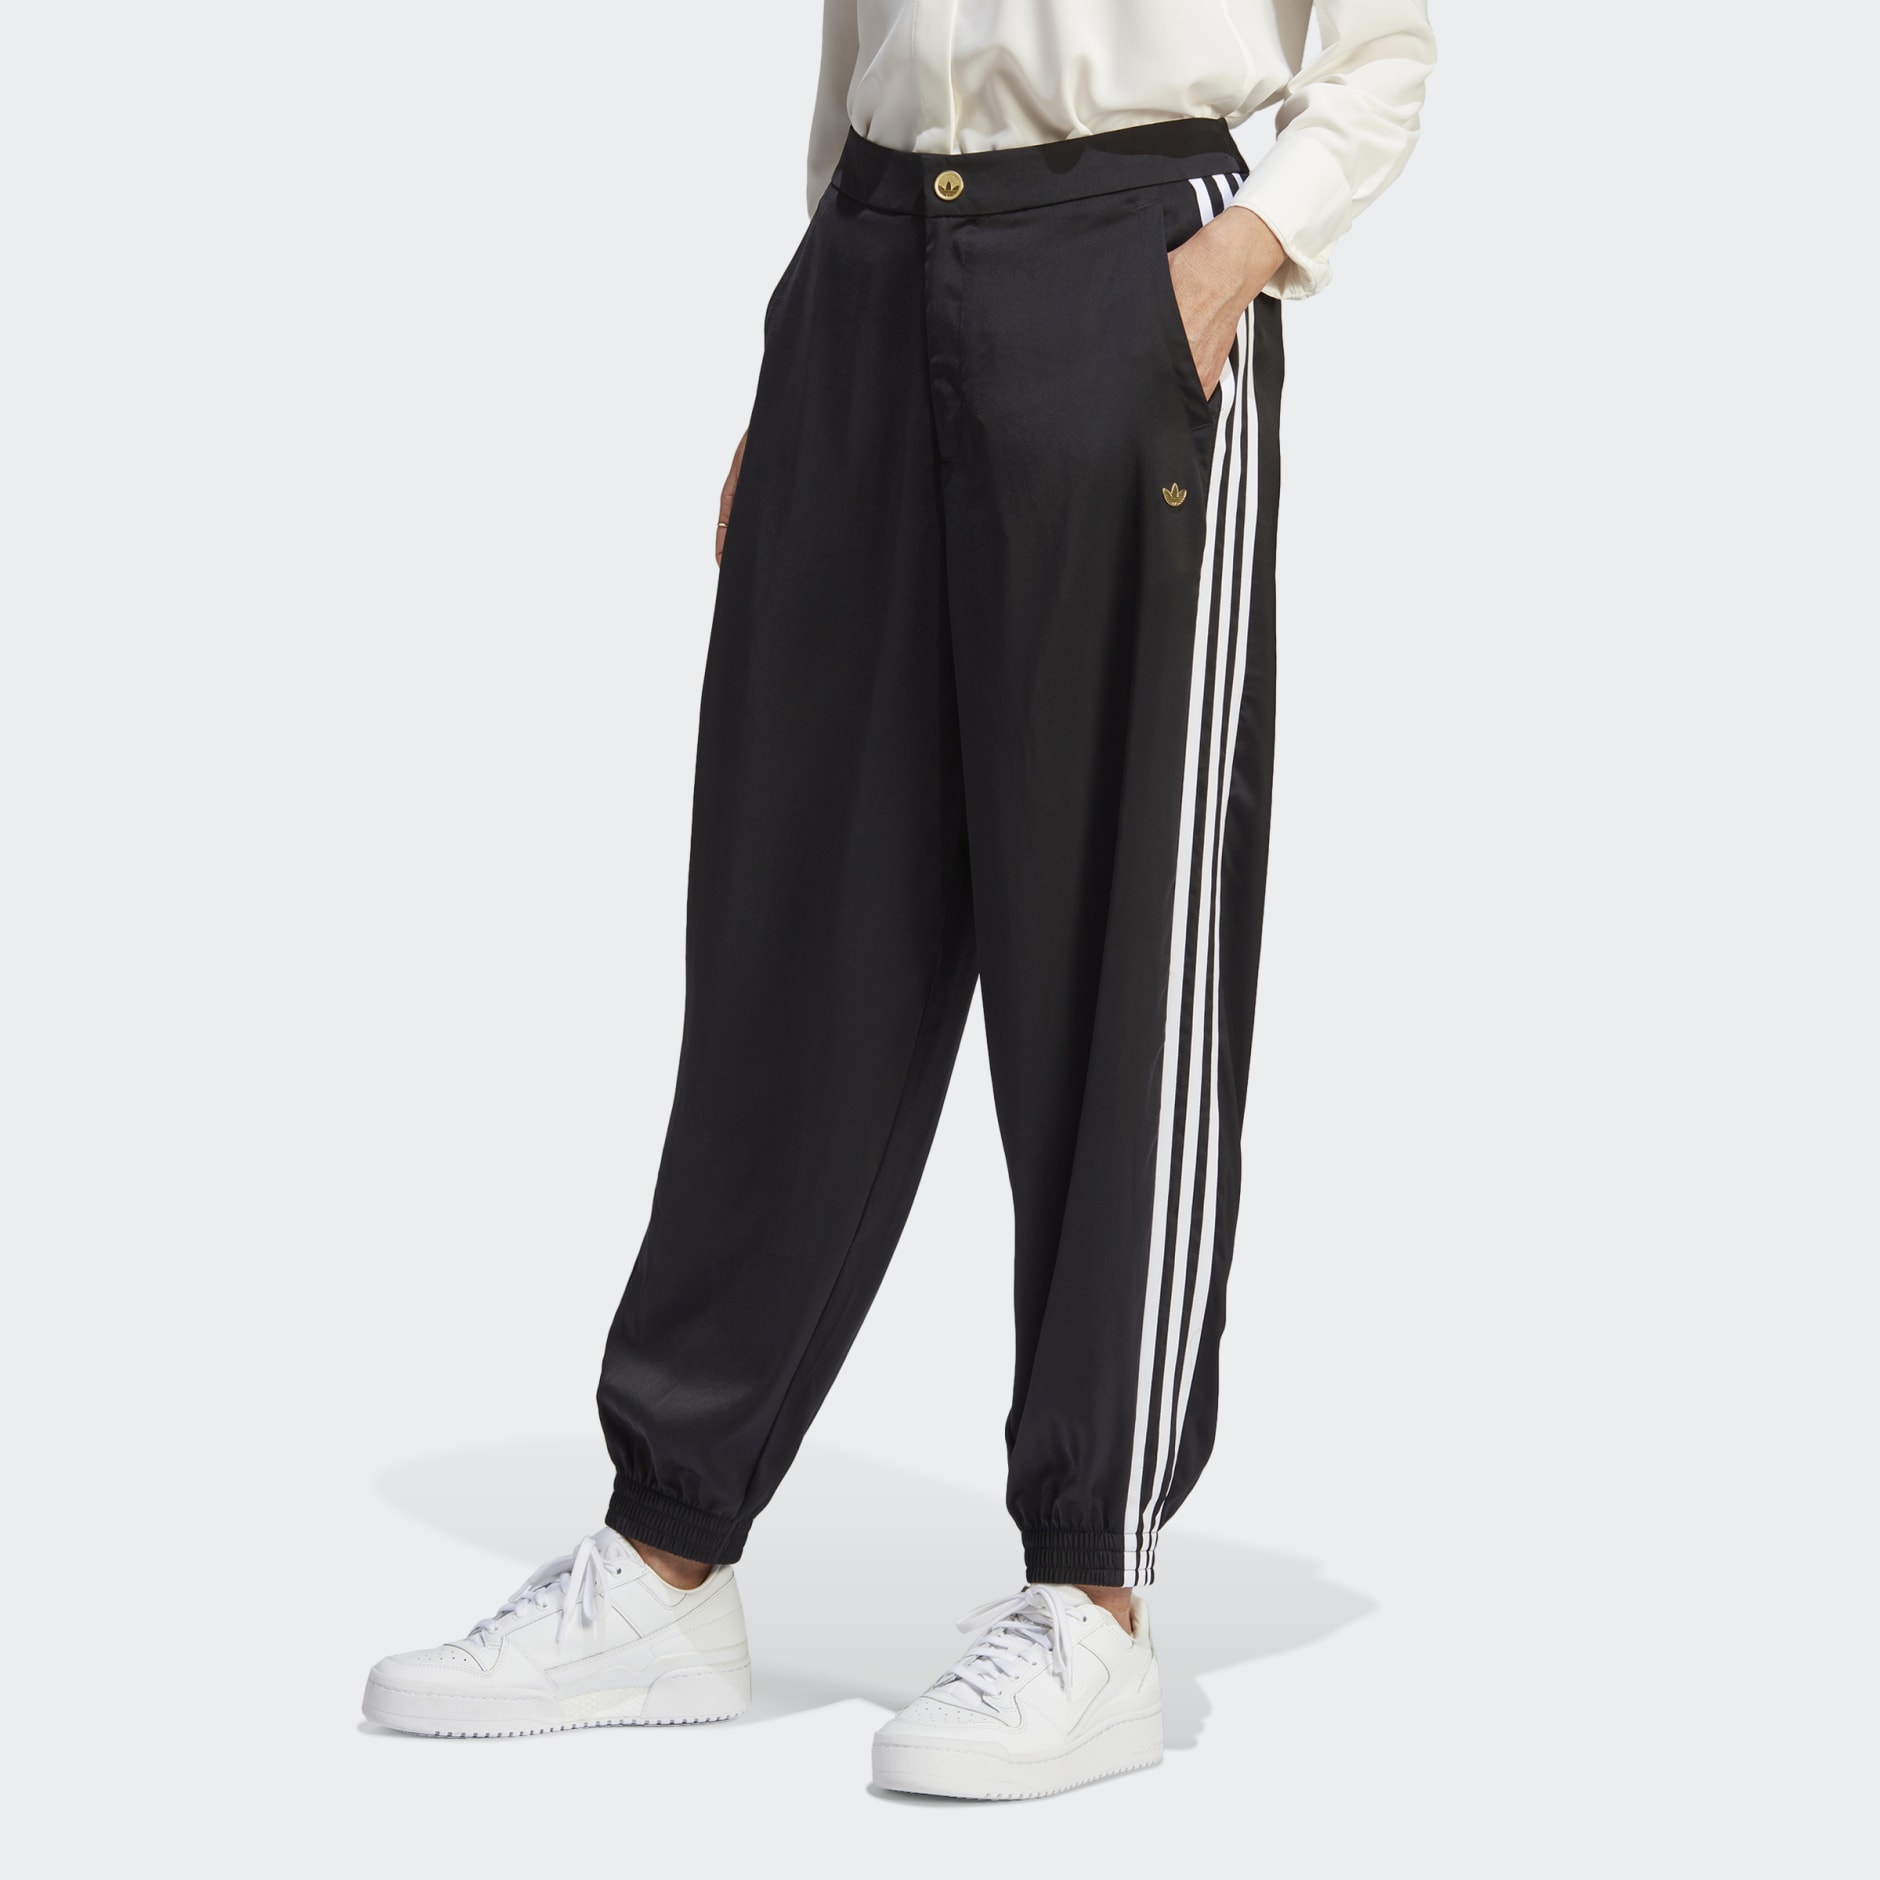 HARVESTY Cropped Circus Pants Balloon Pants Wide Pants